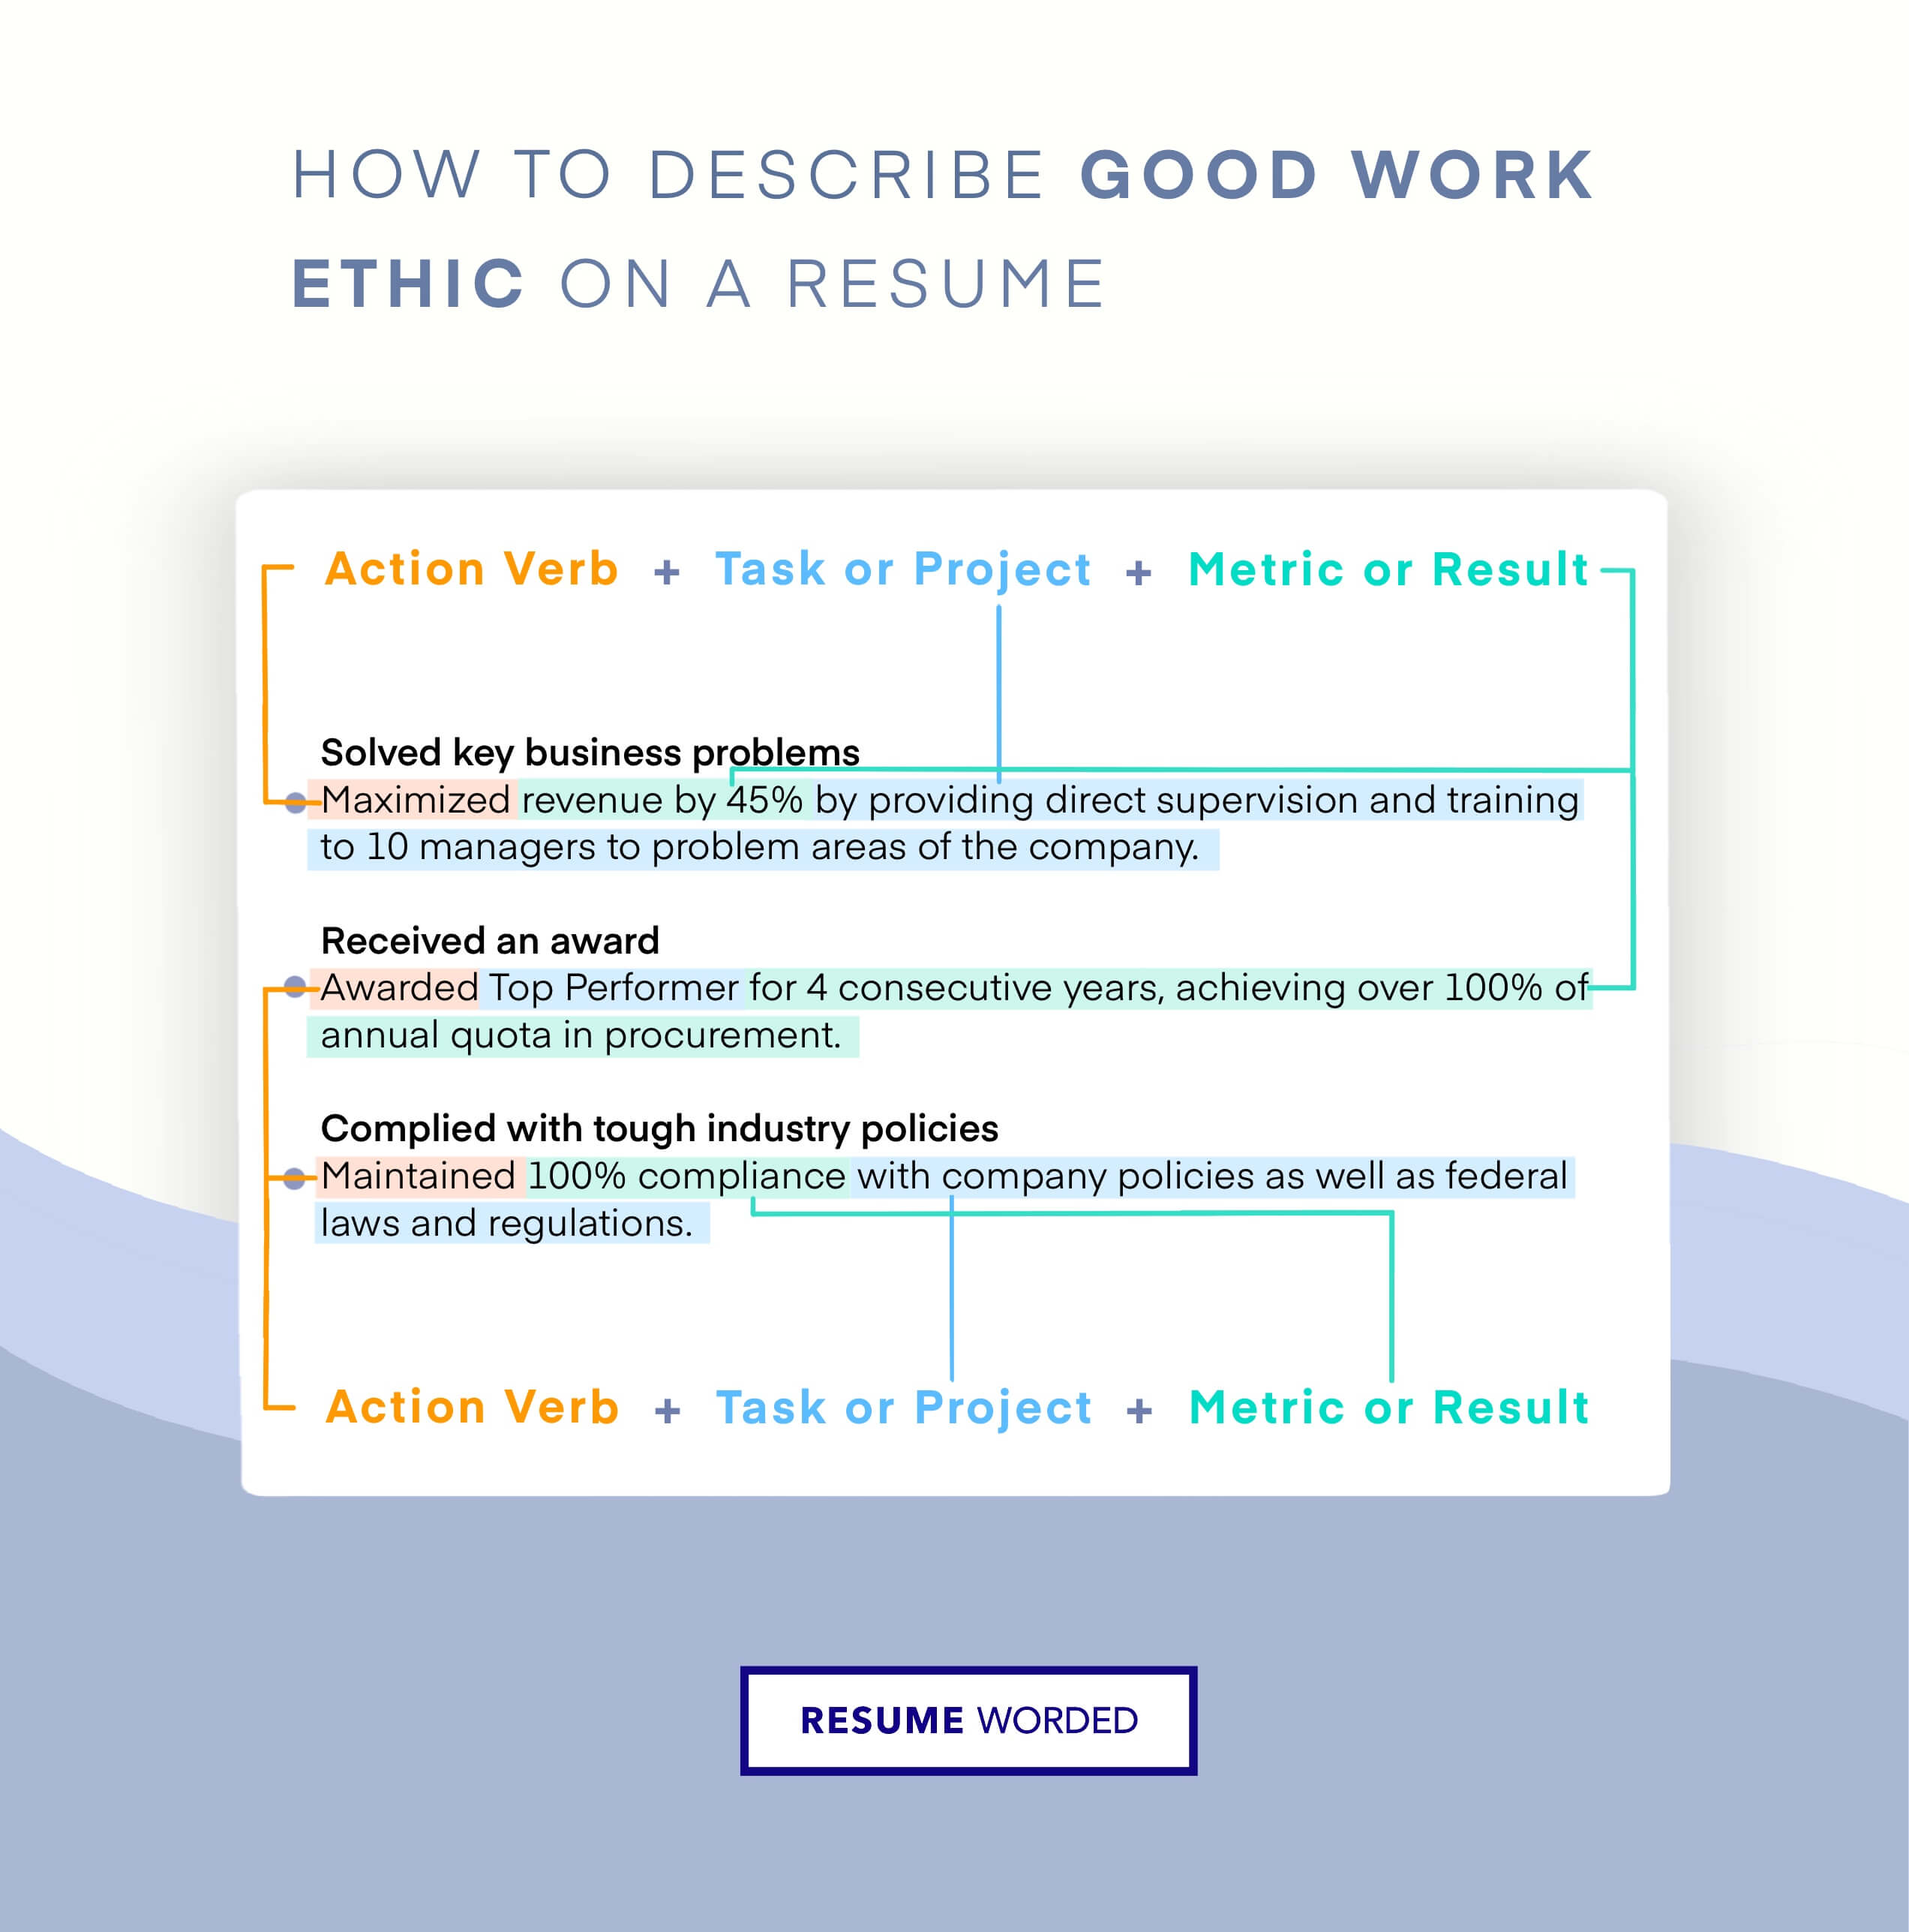 How To Describe Good Work Ethic on a Resume